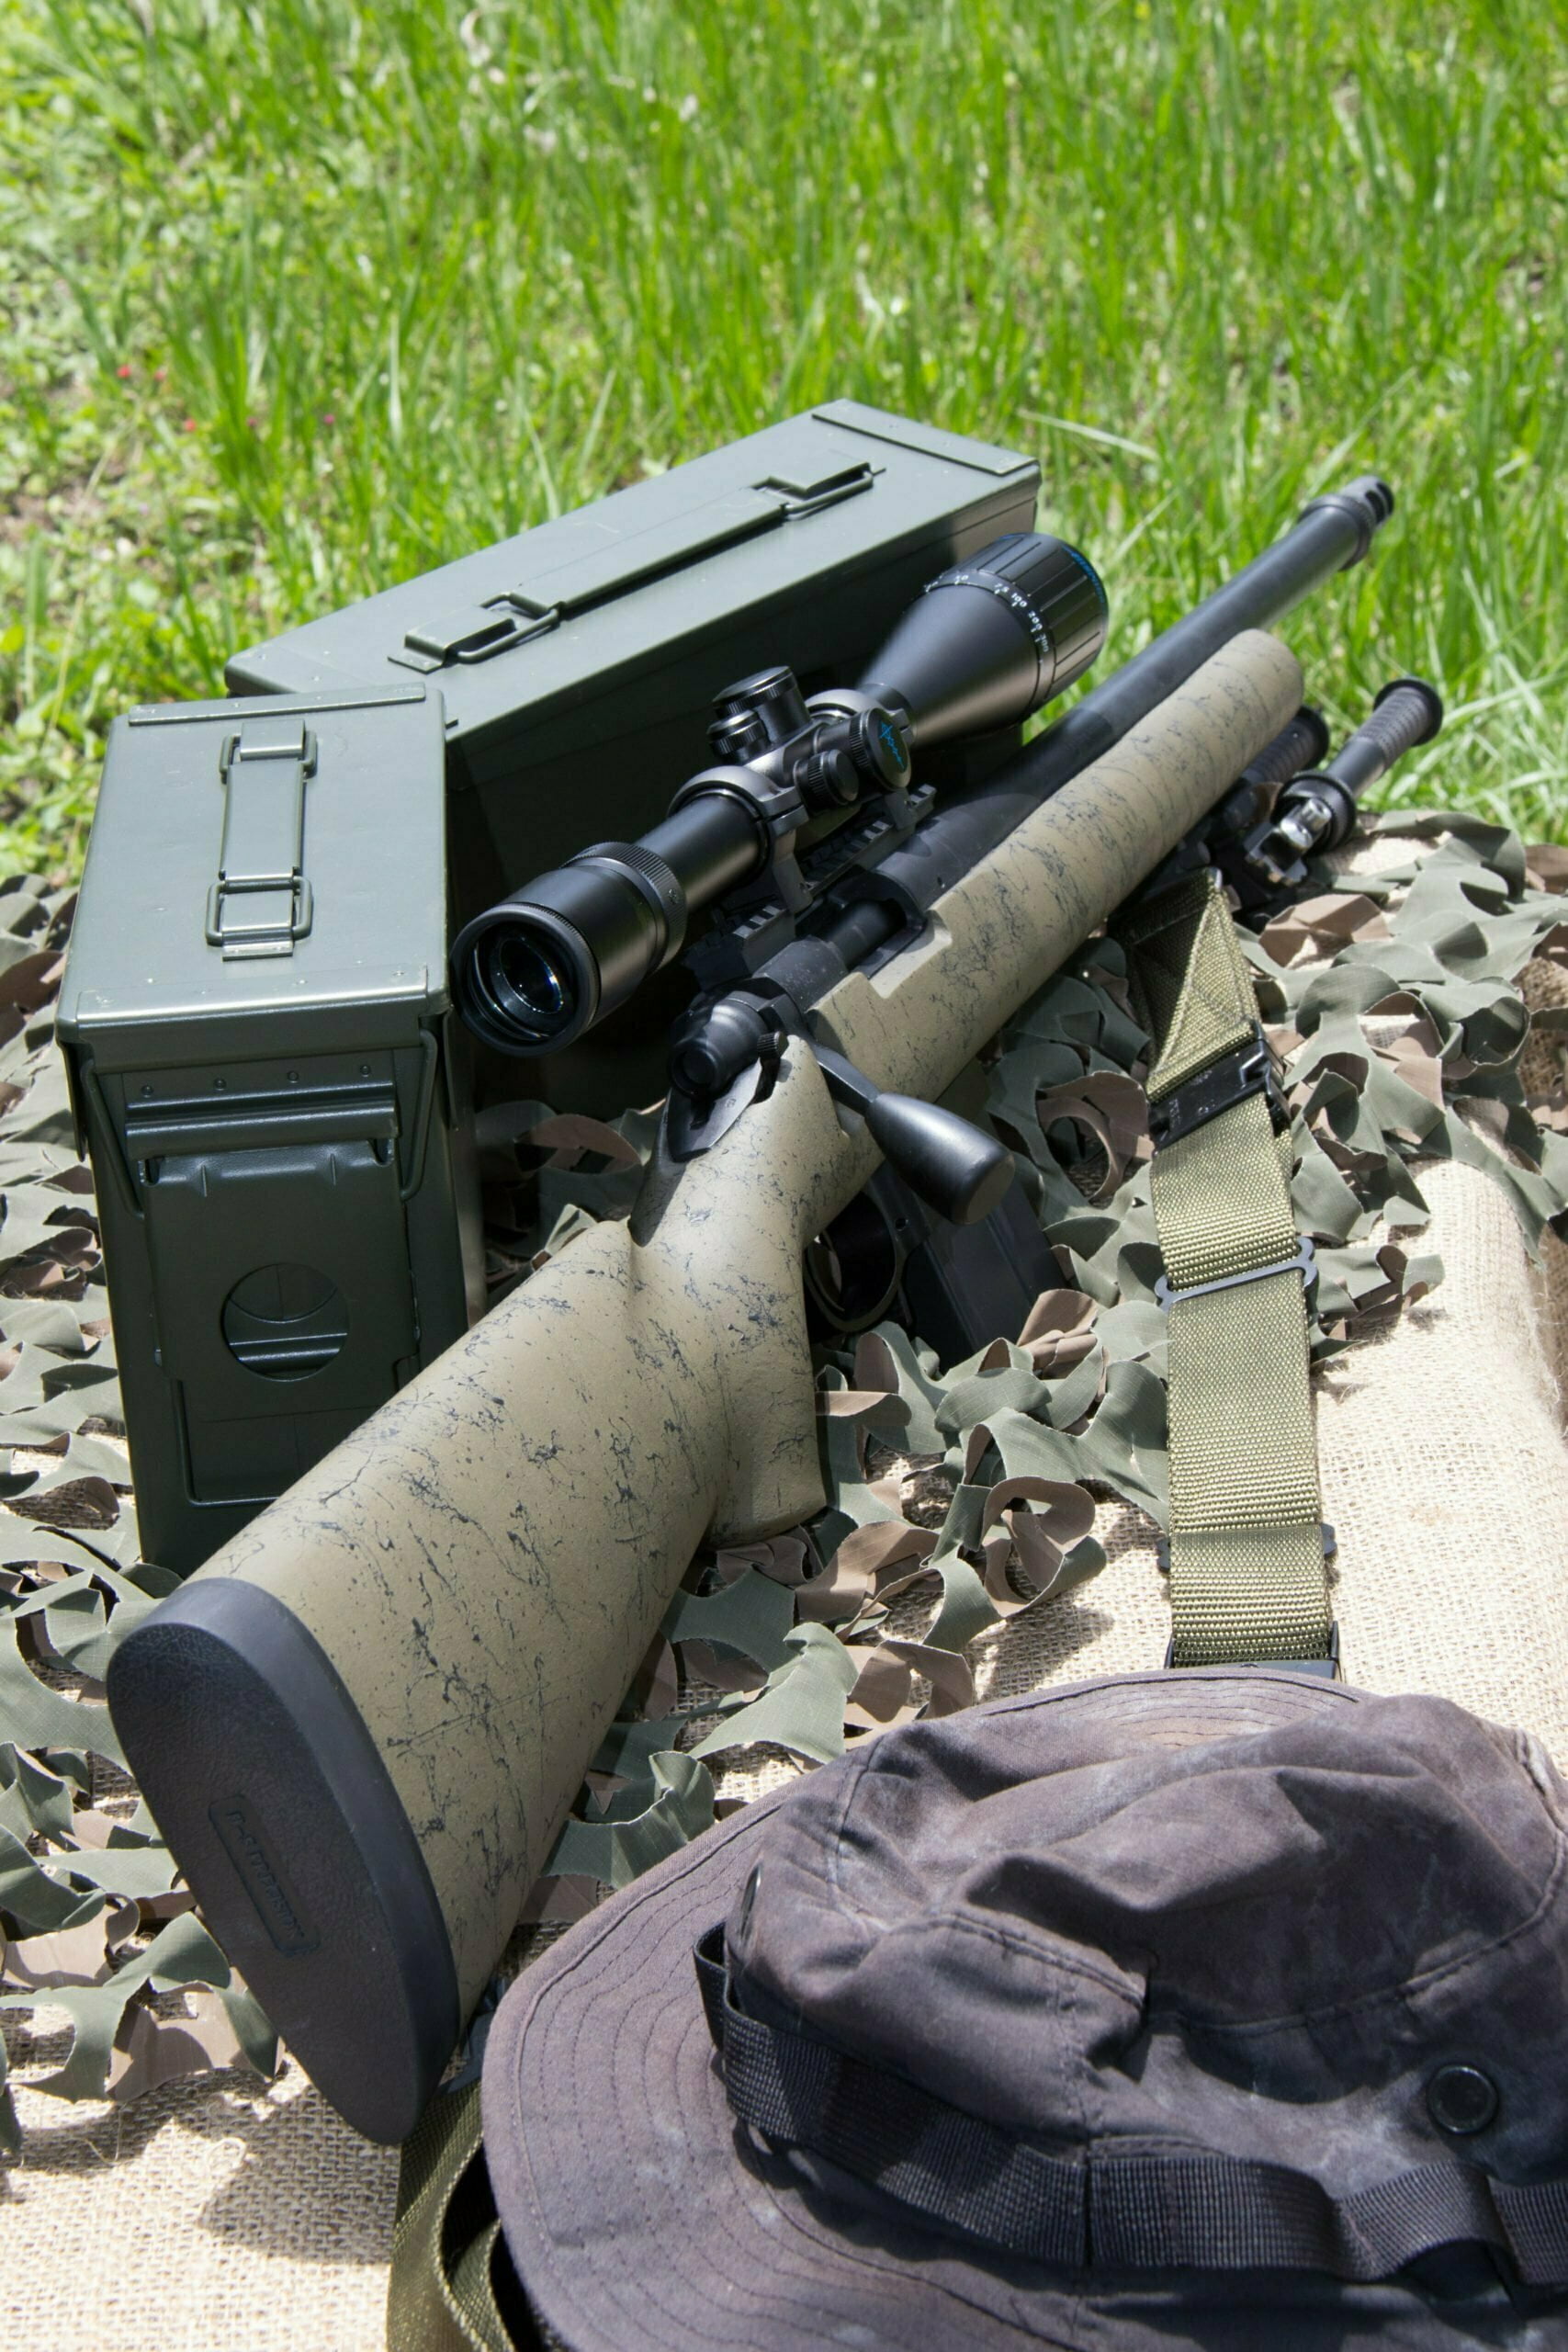 Shpeherd 3x10 P2 Long Range BDC with Range Finding Reticle Mounted to 700 Rem. Good out to 1000 yards!